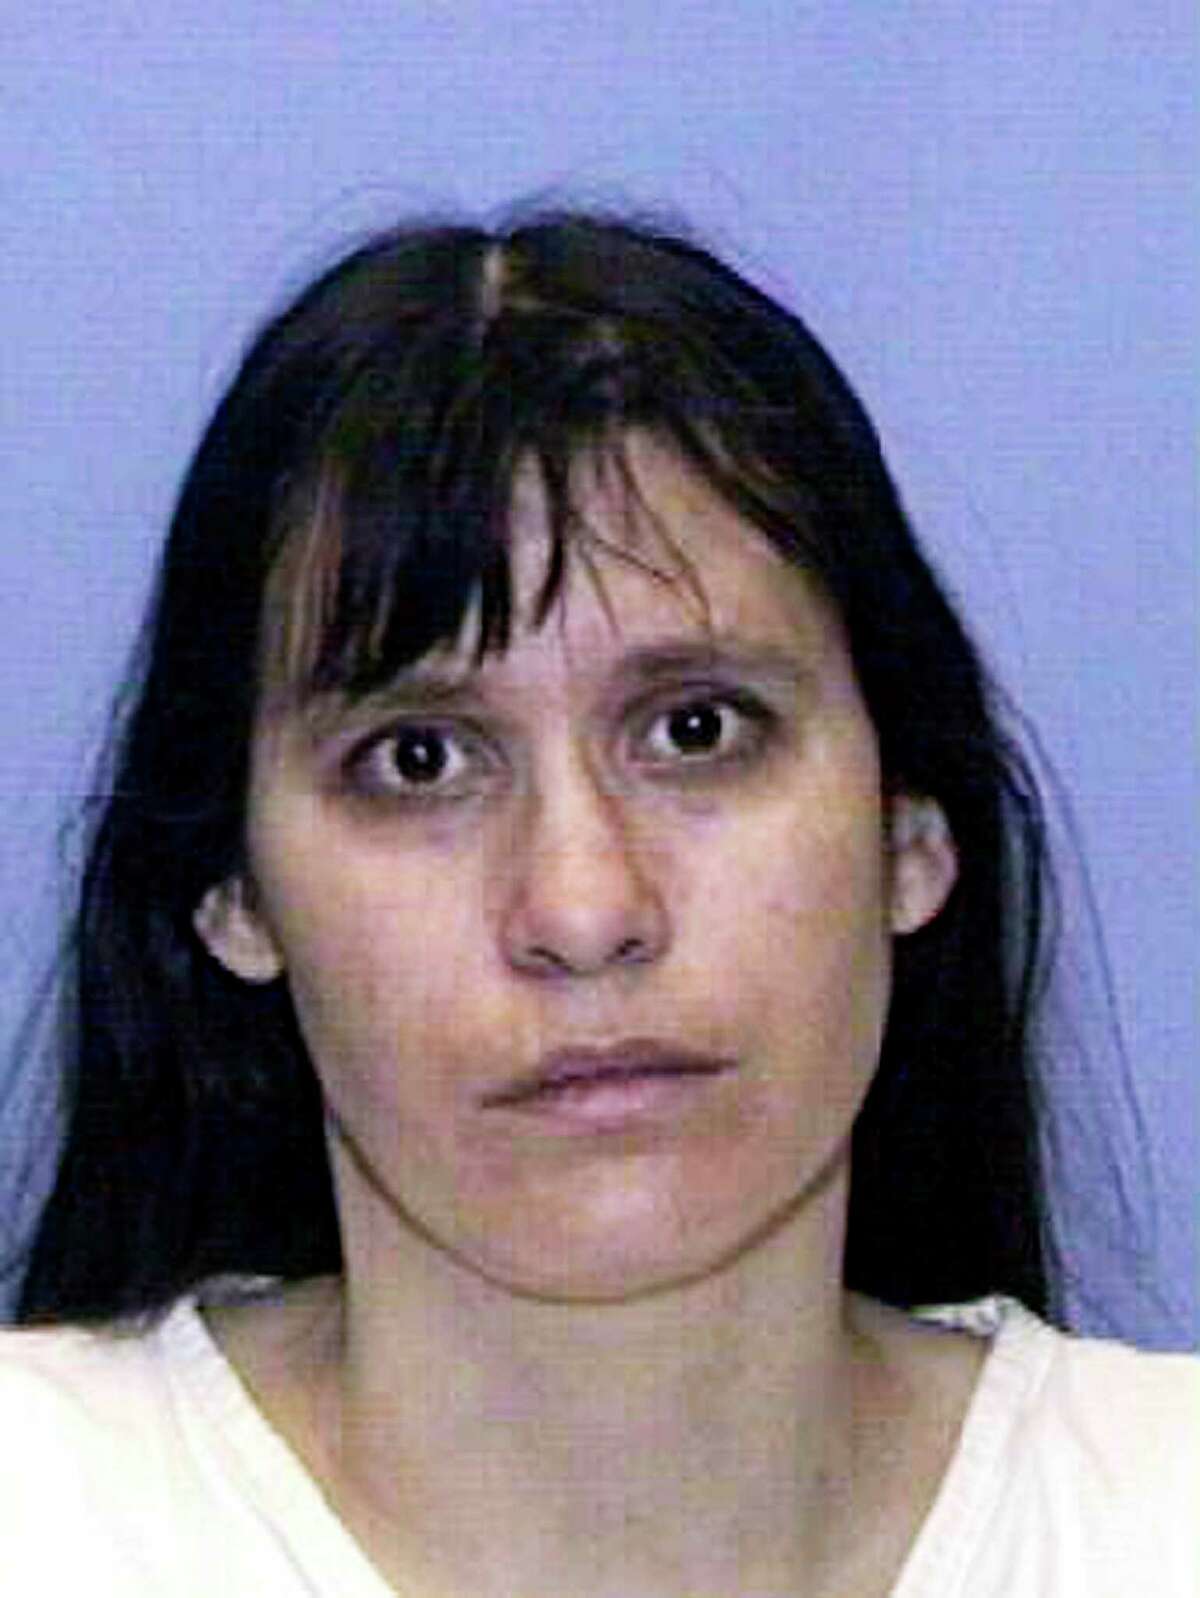 It's been 15 years since Andrea Yates confessed to drowning her five children in a bathtub. She had a history of postpartum depression, which may have led her to commit such a crime. Today, though, views on postpartum are changing and more mothers are getting help. Take a look through the gallery to see old photos of the five children who lost their lives at the hand of their mother.